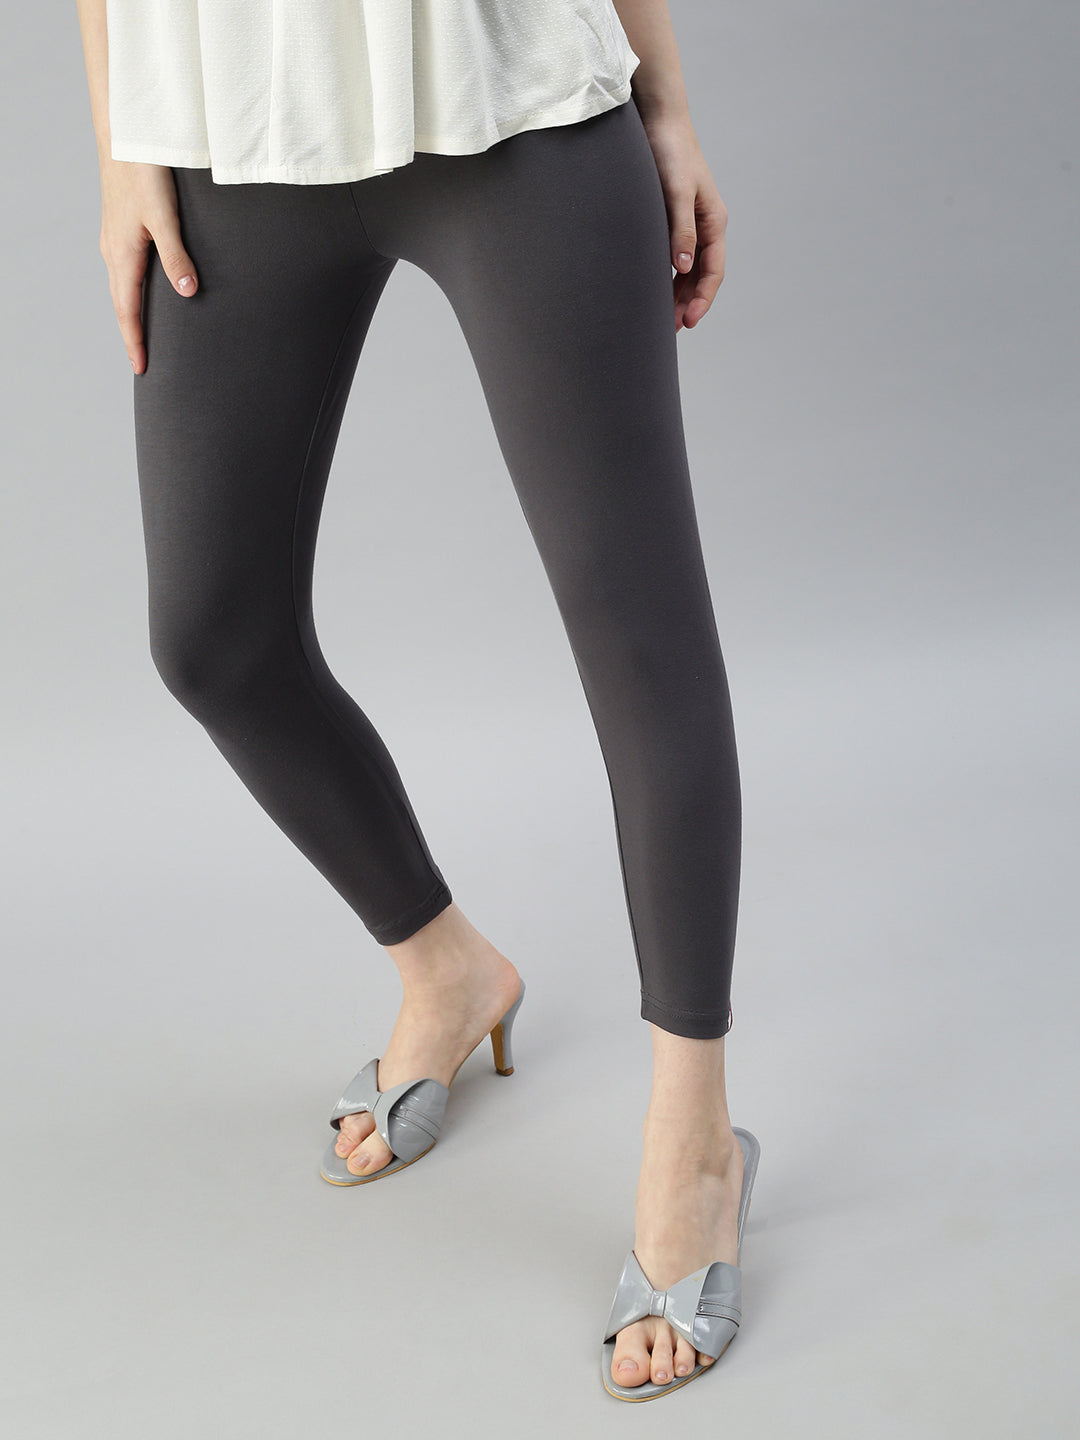 Shop Prisma's Cuff Length Leggings in Slate for a Stylish Look